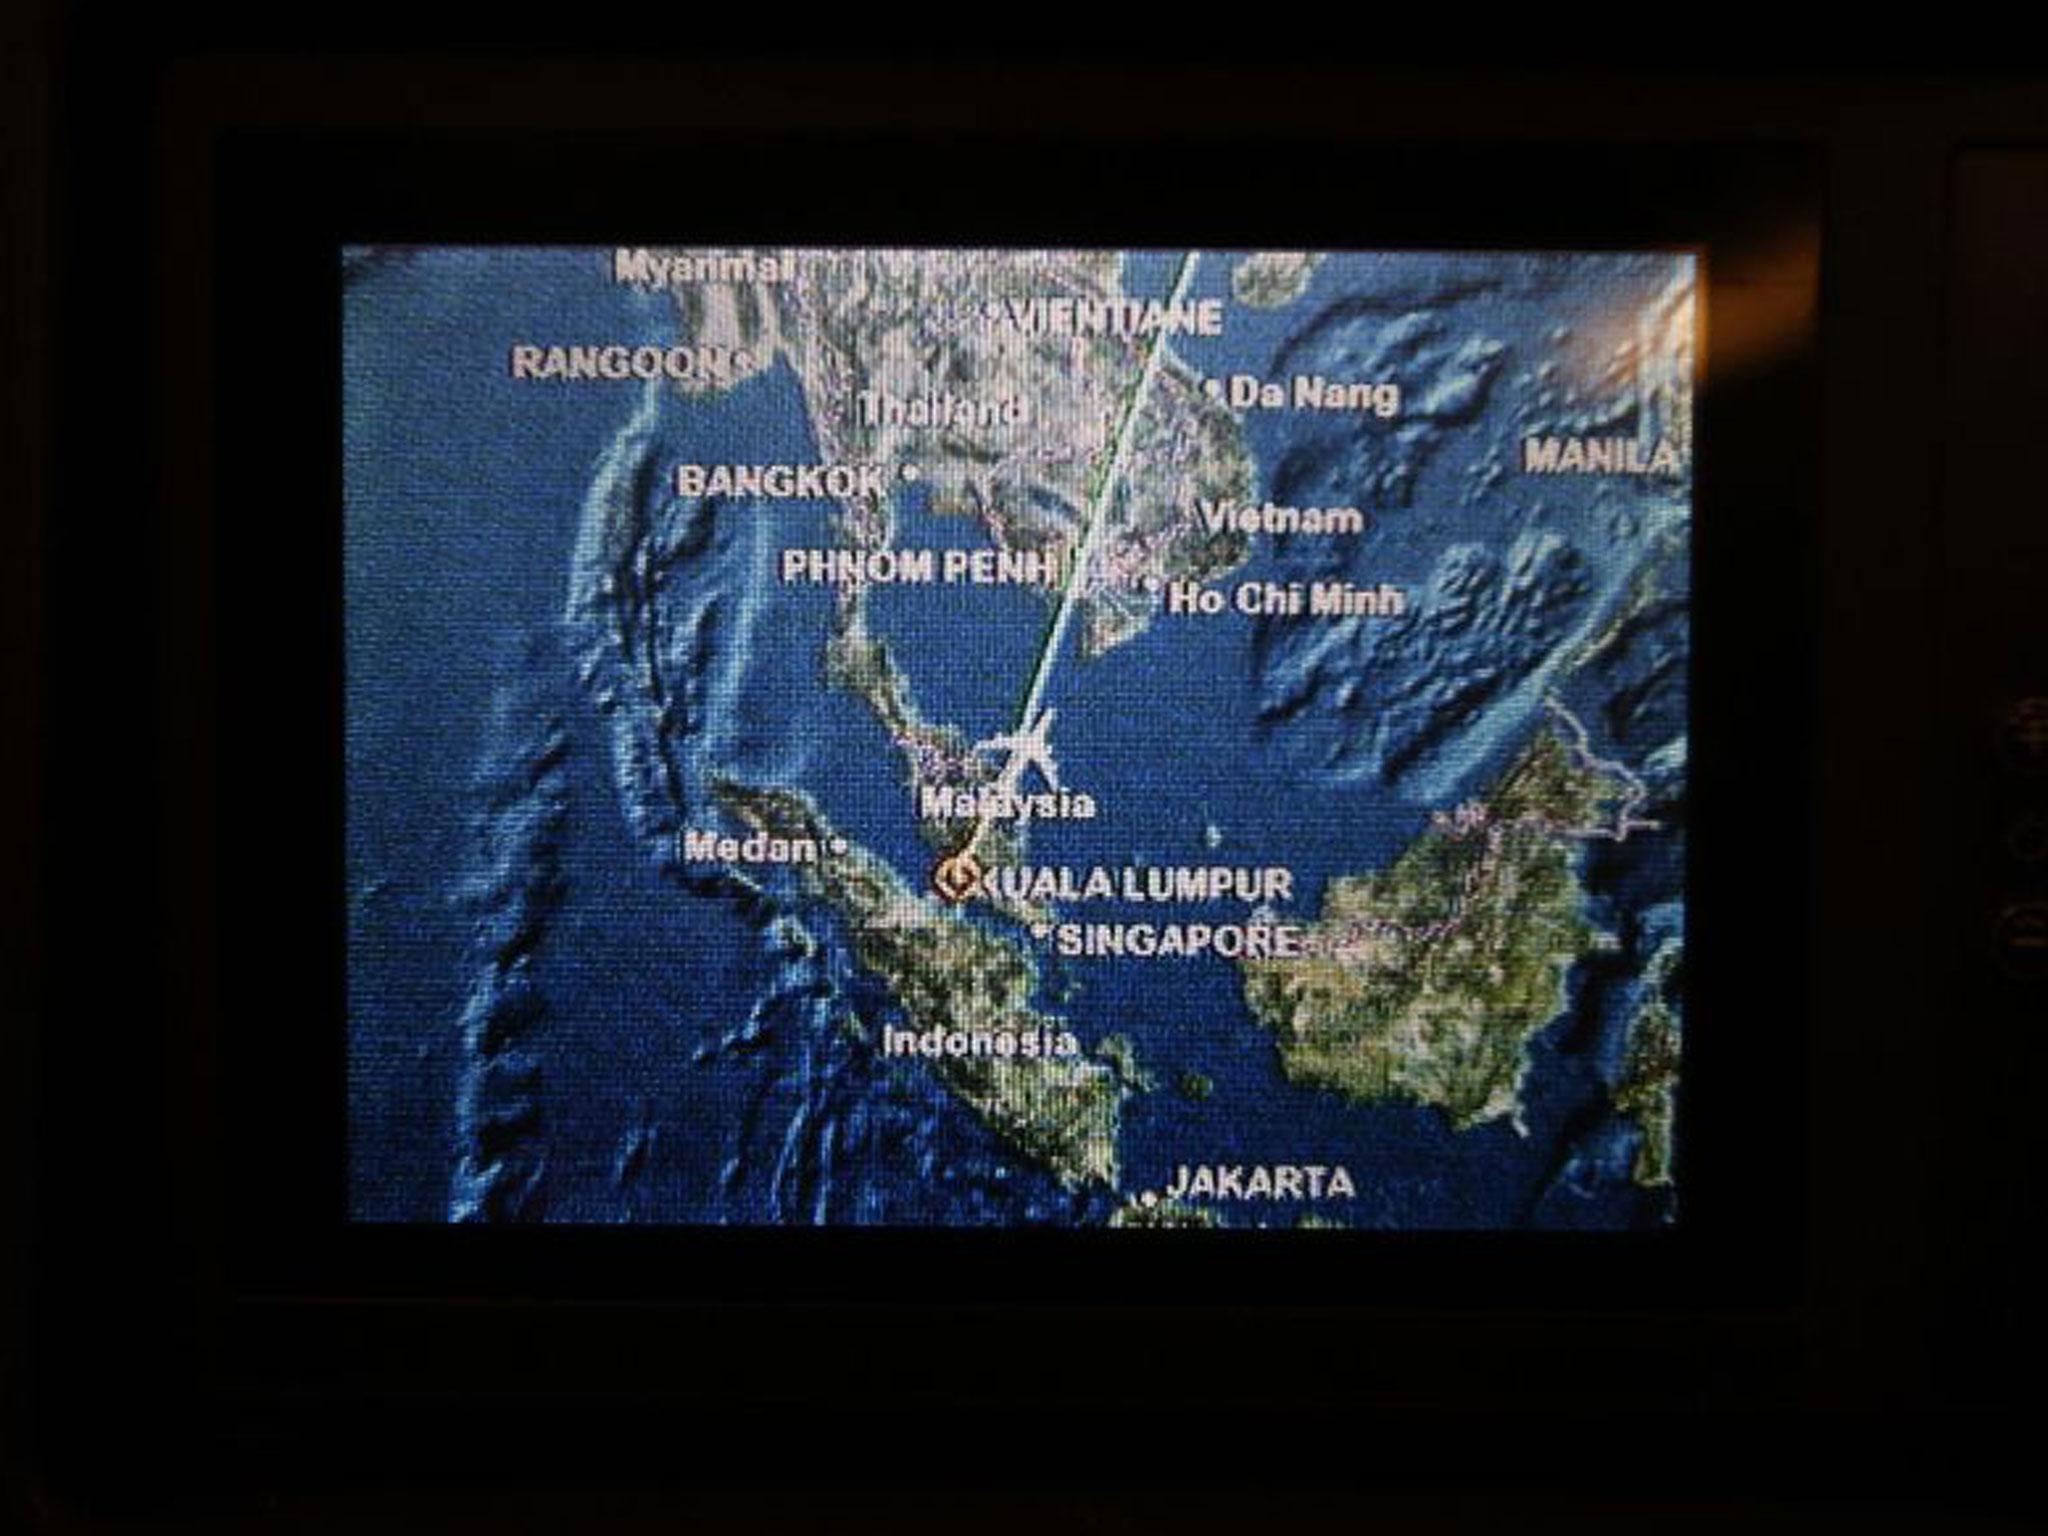 A screen on board Malaysia Airlines Boeing 777-200ER flight MH318 shows the plane's flight path as it cruises over the South China Sea from Kuala Lumpur towards Beijing at approximately the same point when flight MH370 lost contact with air traffic contro